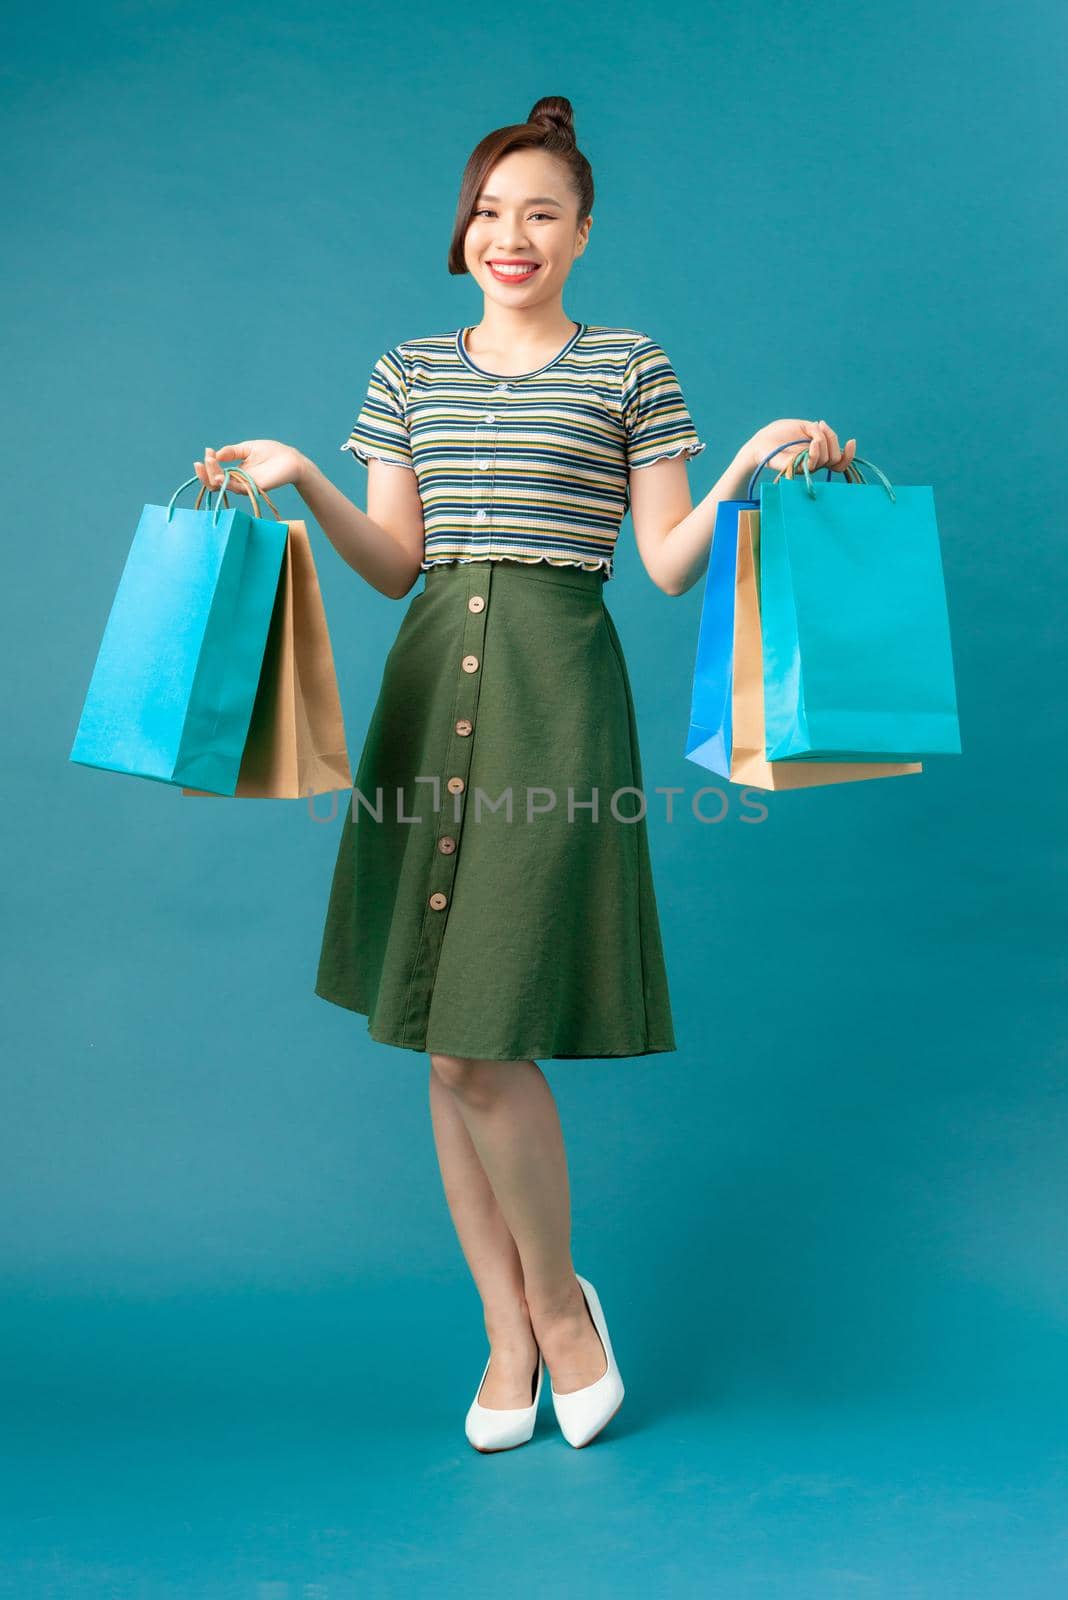 woman take shopping bag happily on blue background